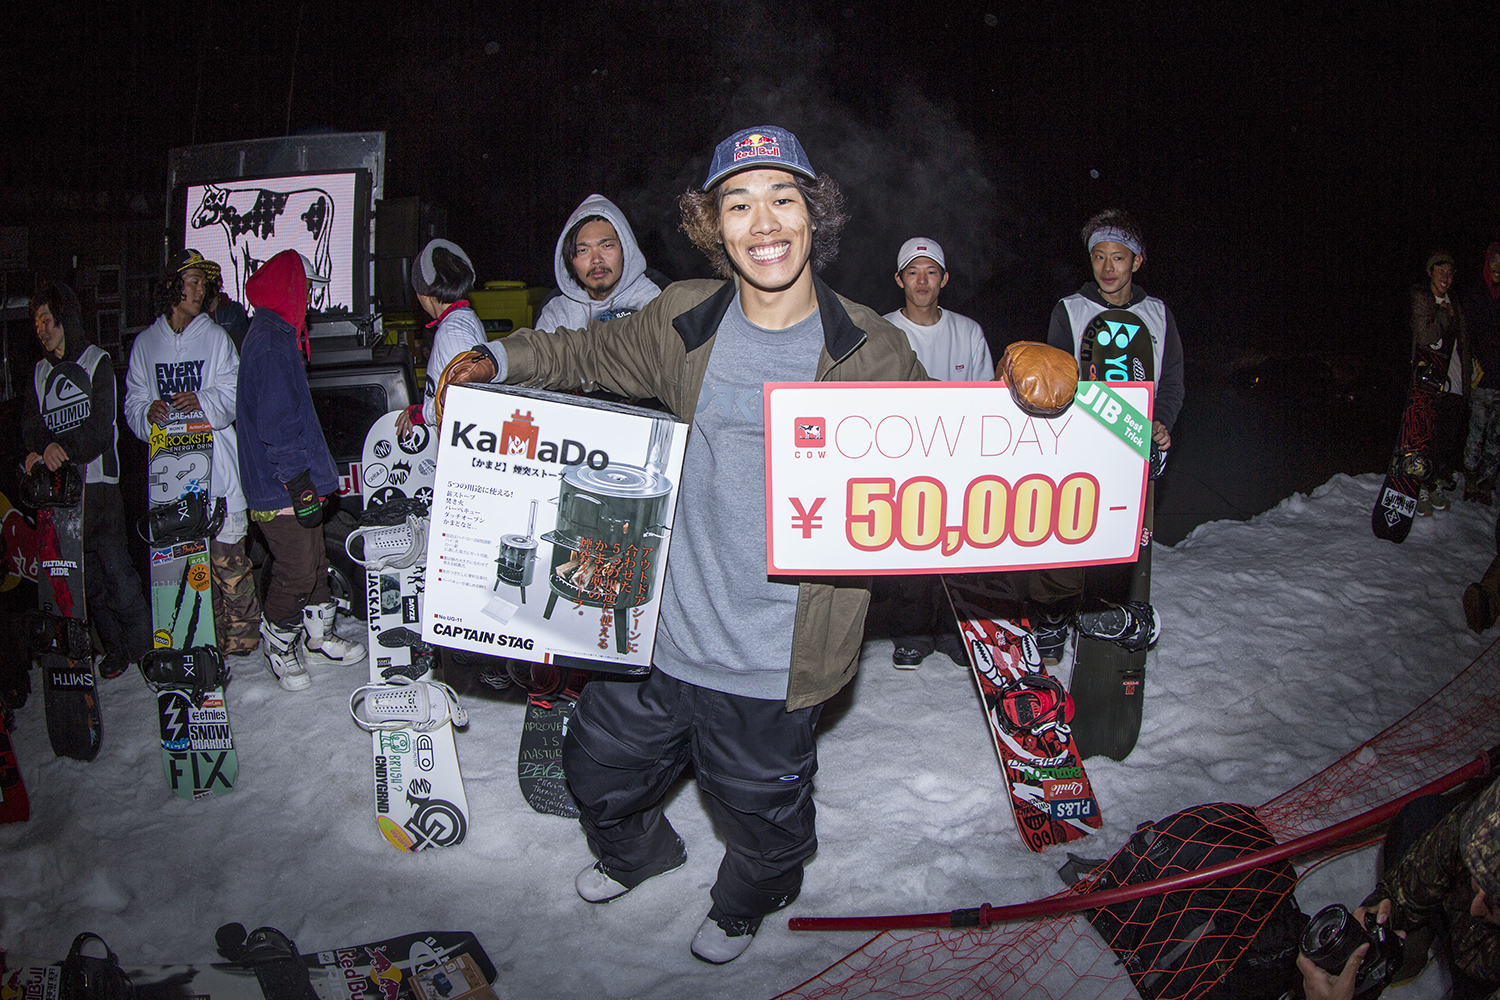 Tomoki who got the best trick by a tremendous transfer, the supplementary prize is a wood stove